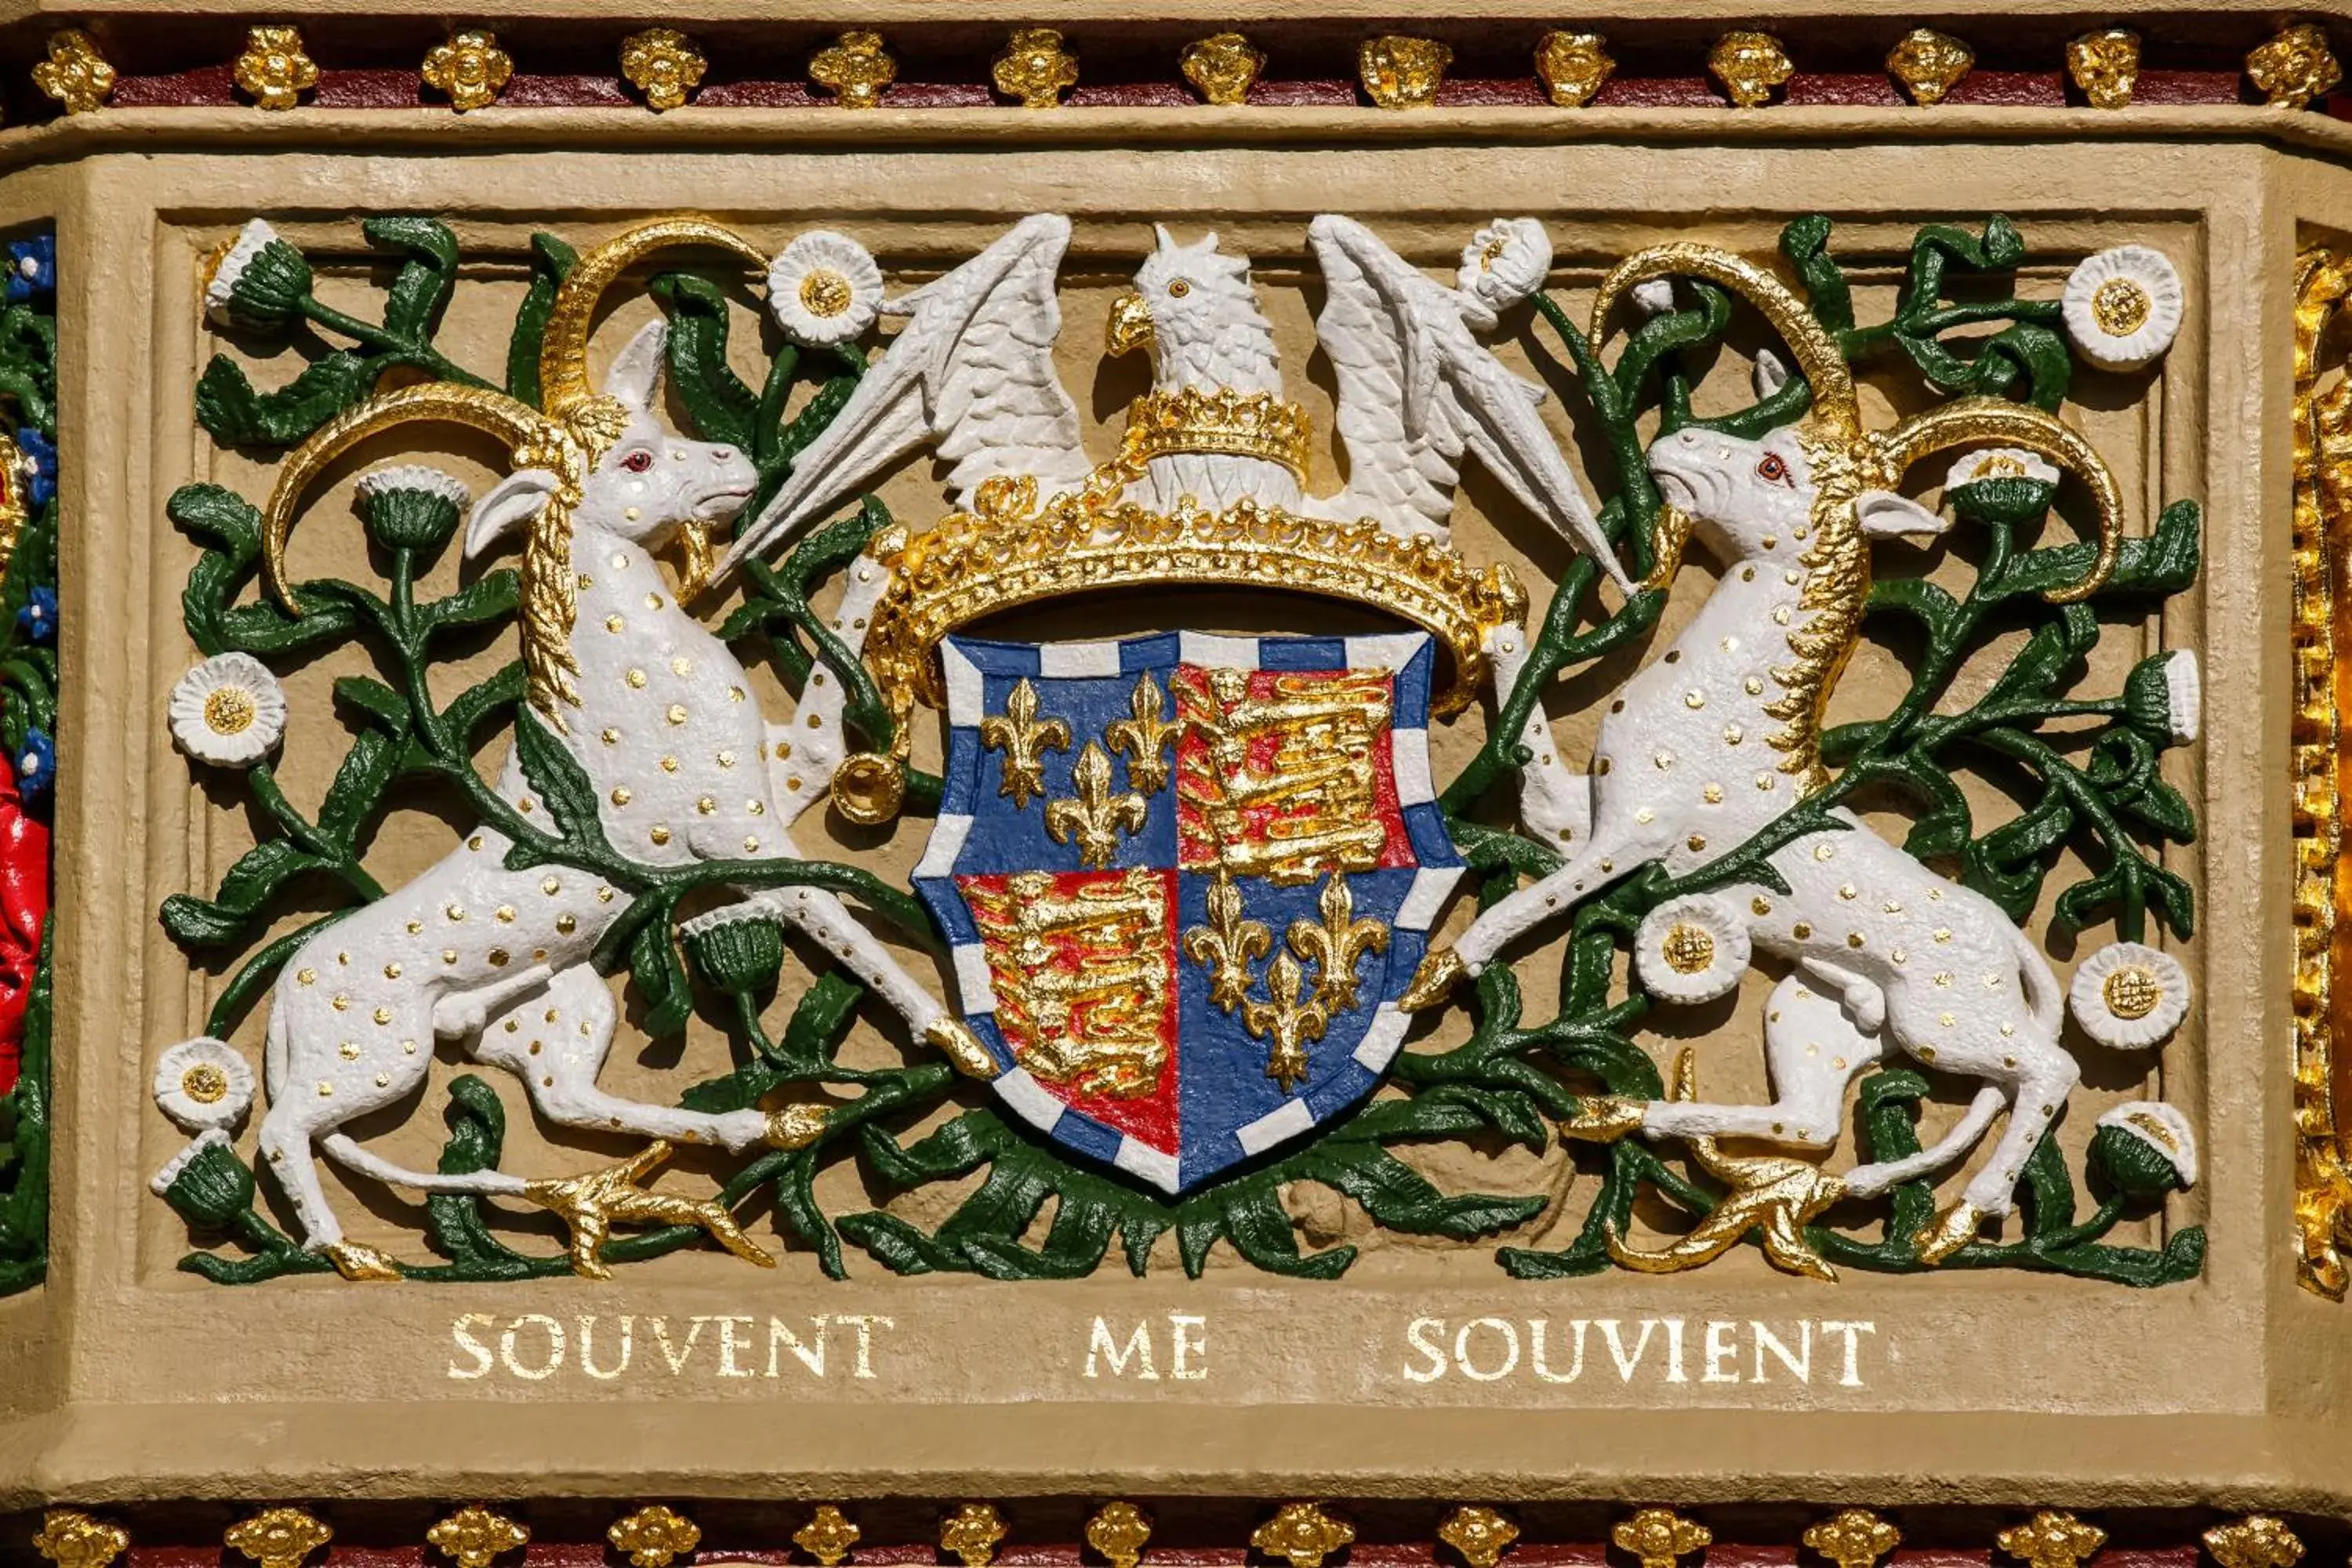 Property logo or sign in Christs College Cambridge